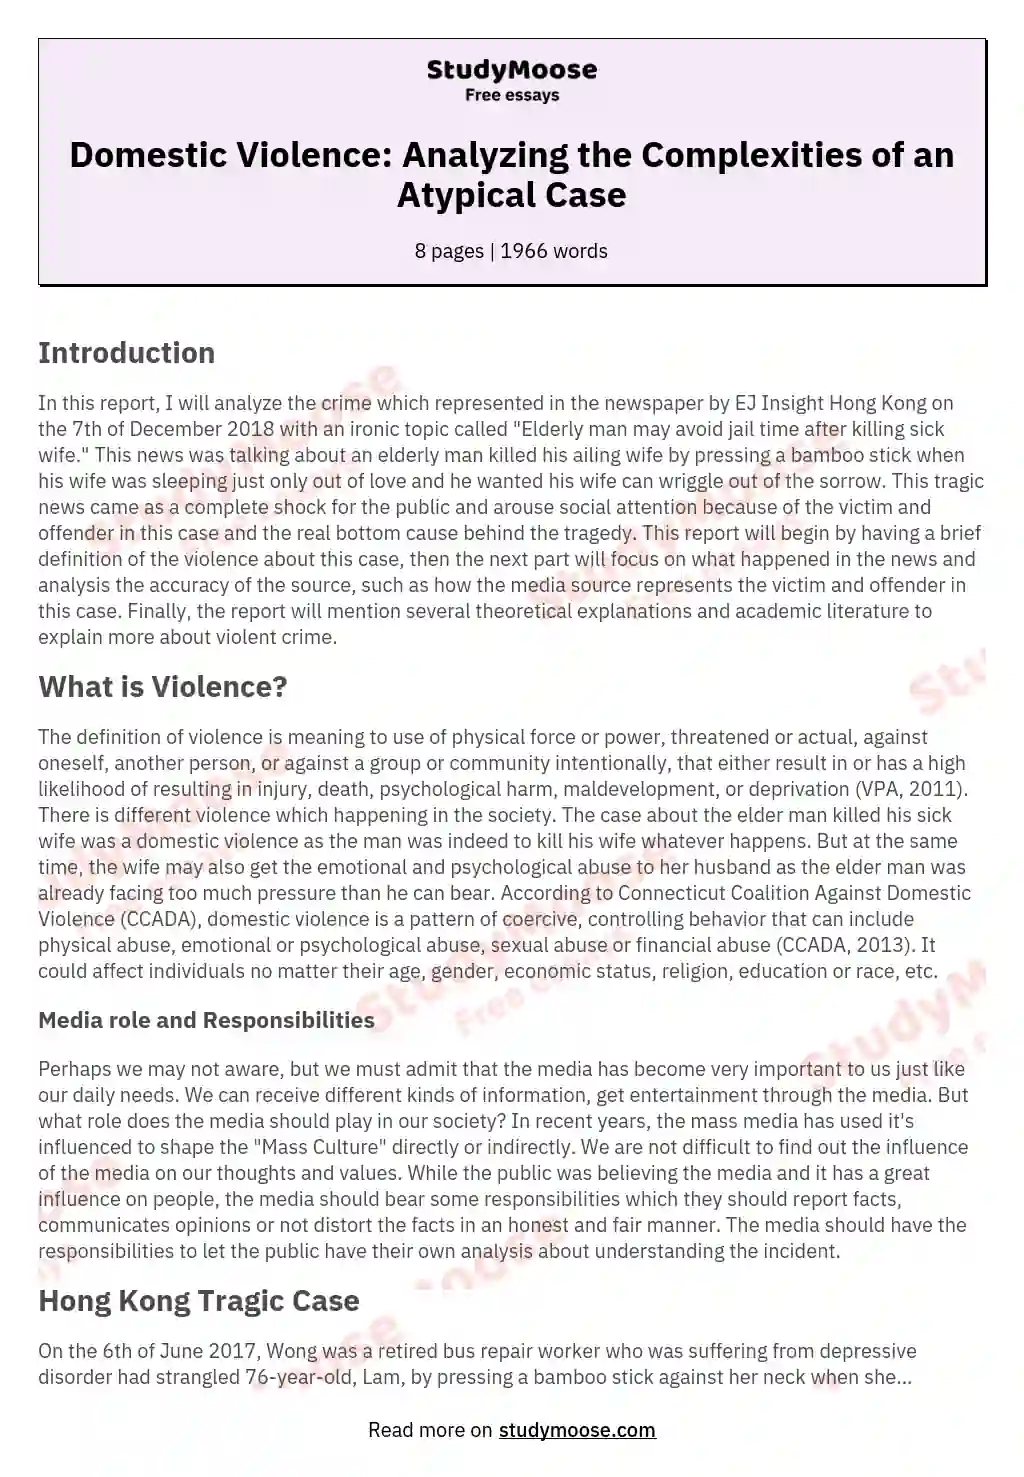 Domestic Violence: Analyzing the Complexities of an Atypical Case essay